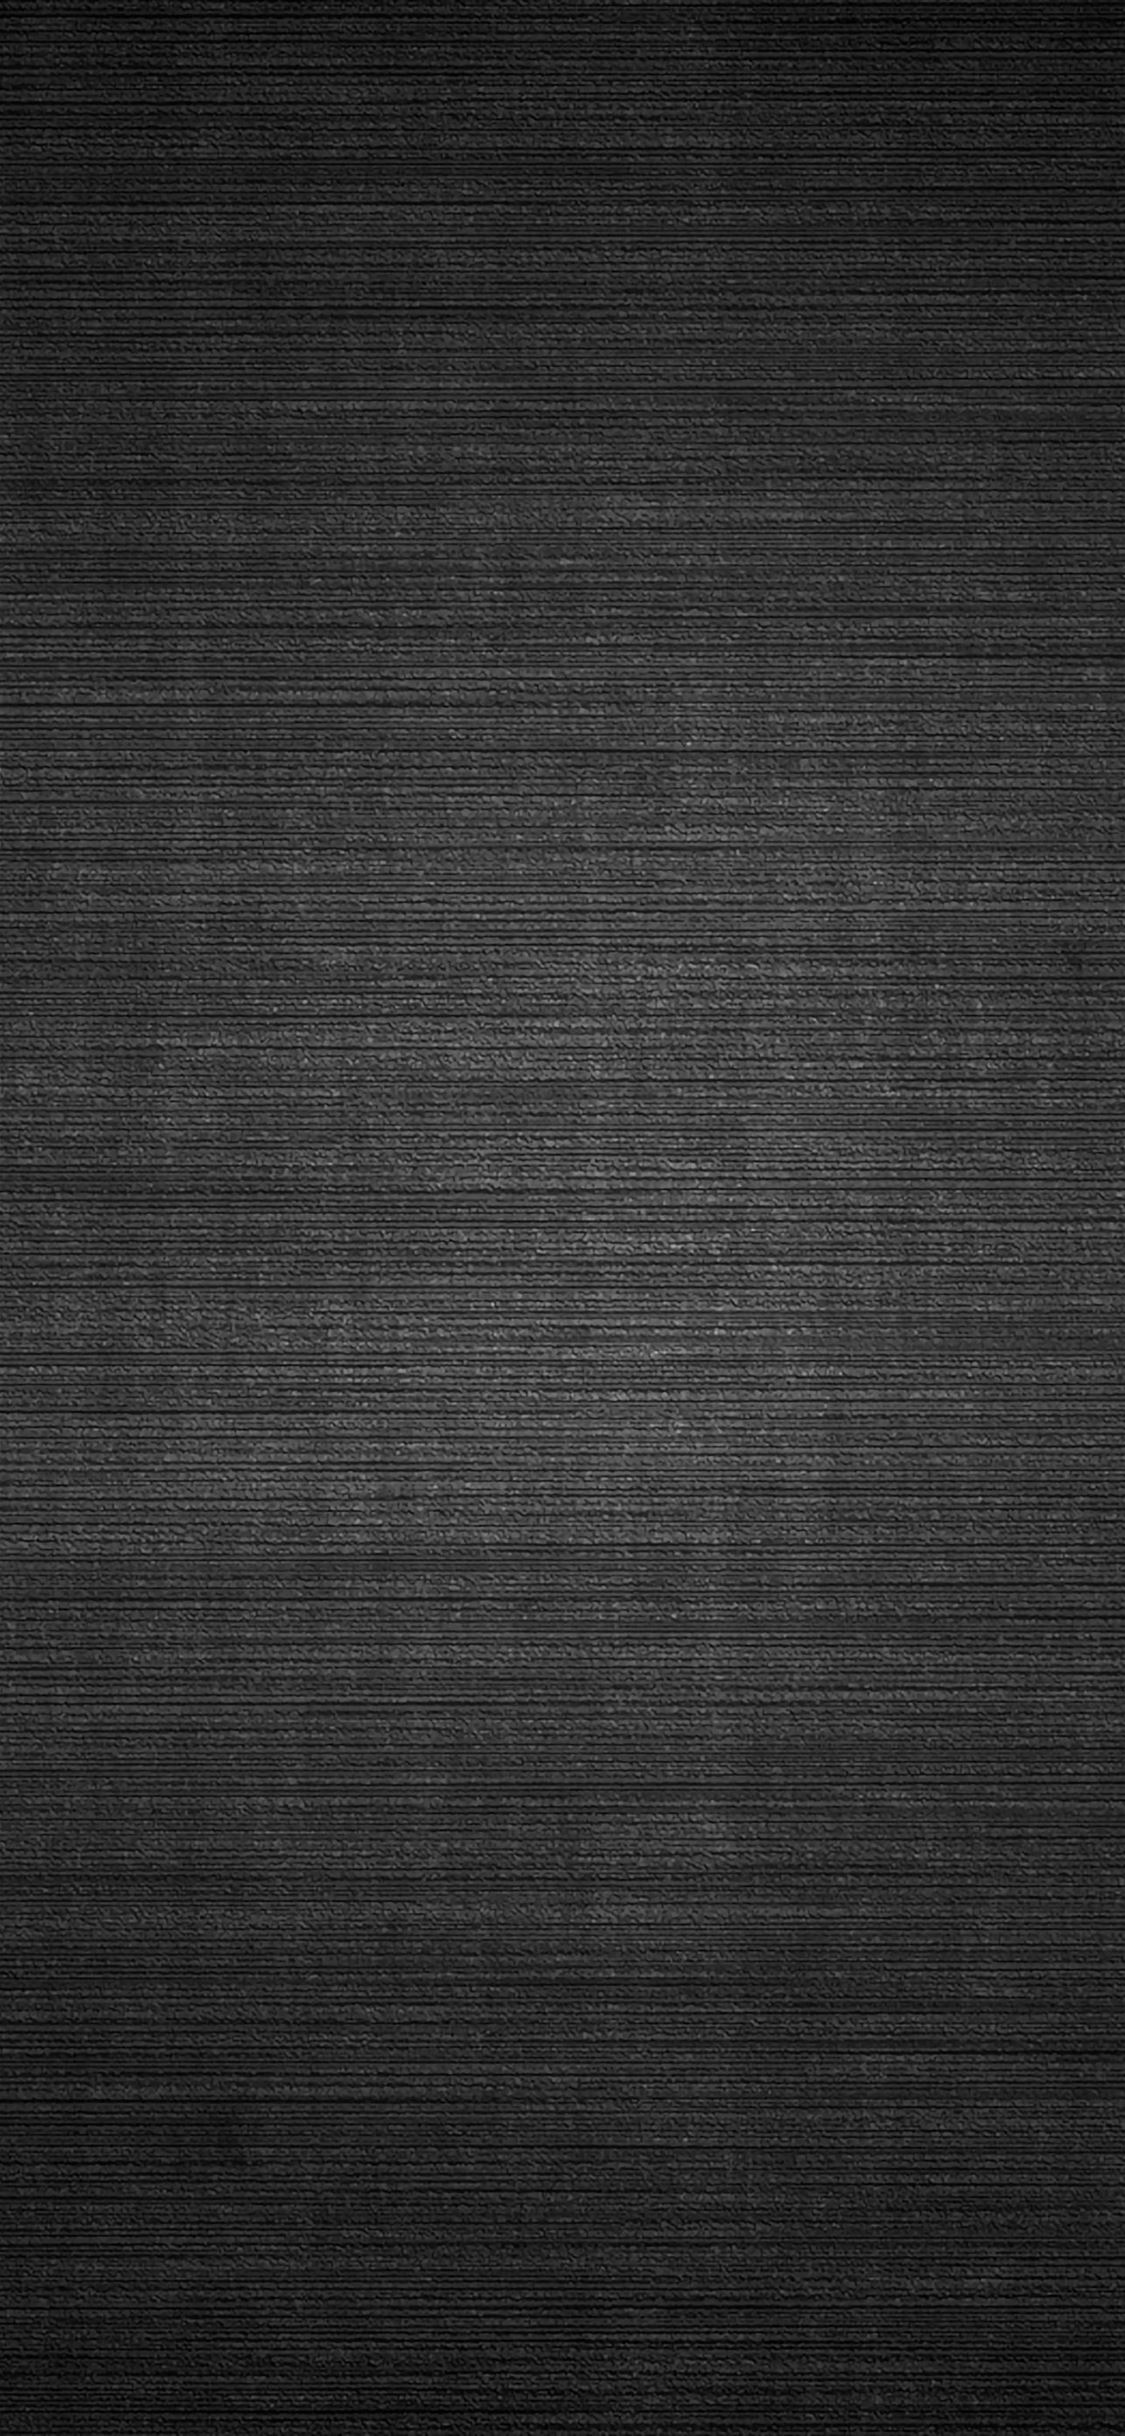 Abstract Gray Texture Background iPhone wallpaper 